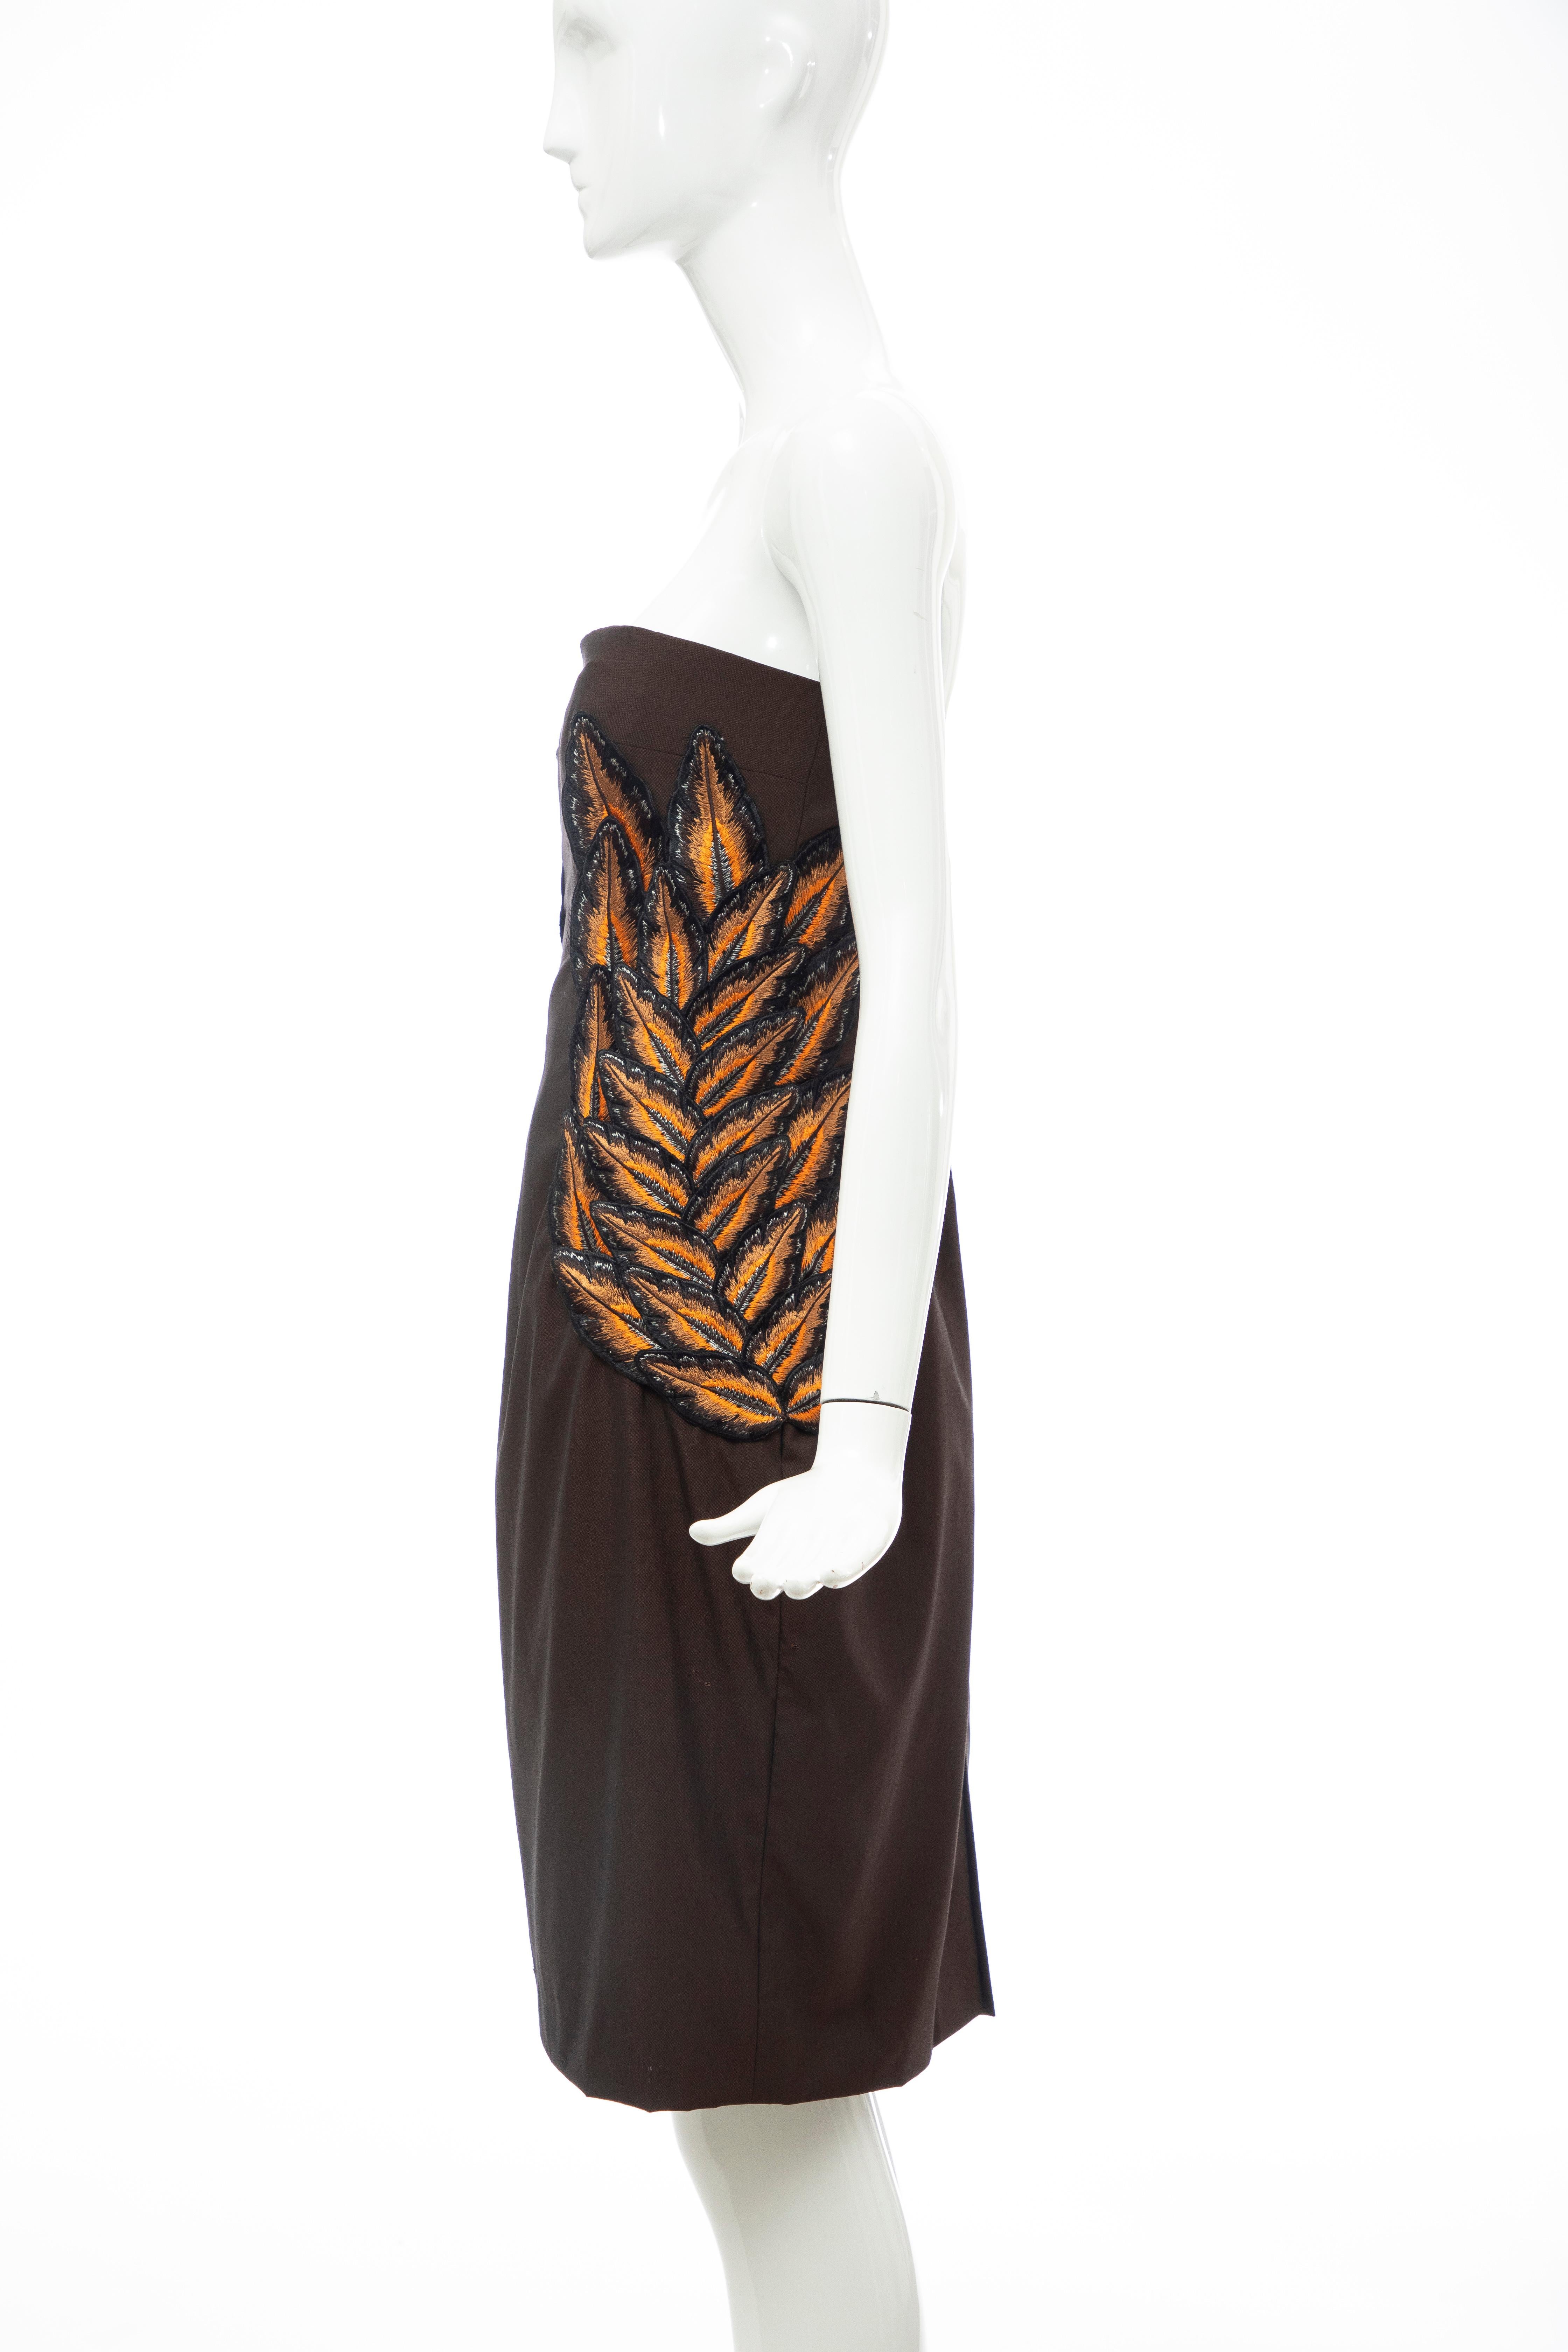 Alexander McQueen Givenchy Couture Strapless Wool Embroidered Dress, Spring 1998 For Sale 2